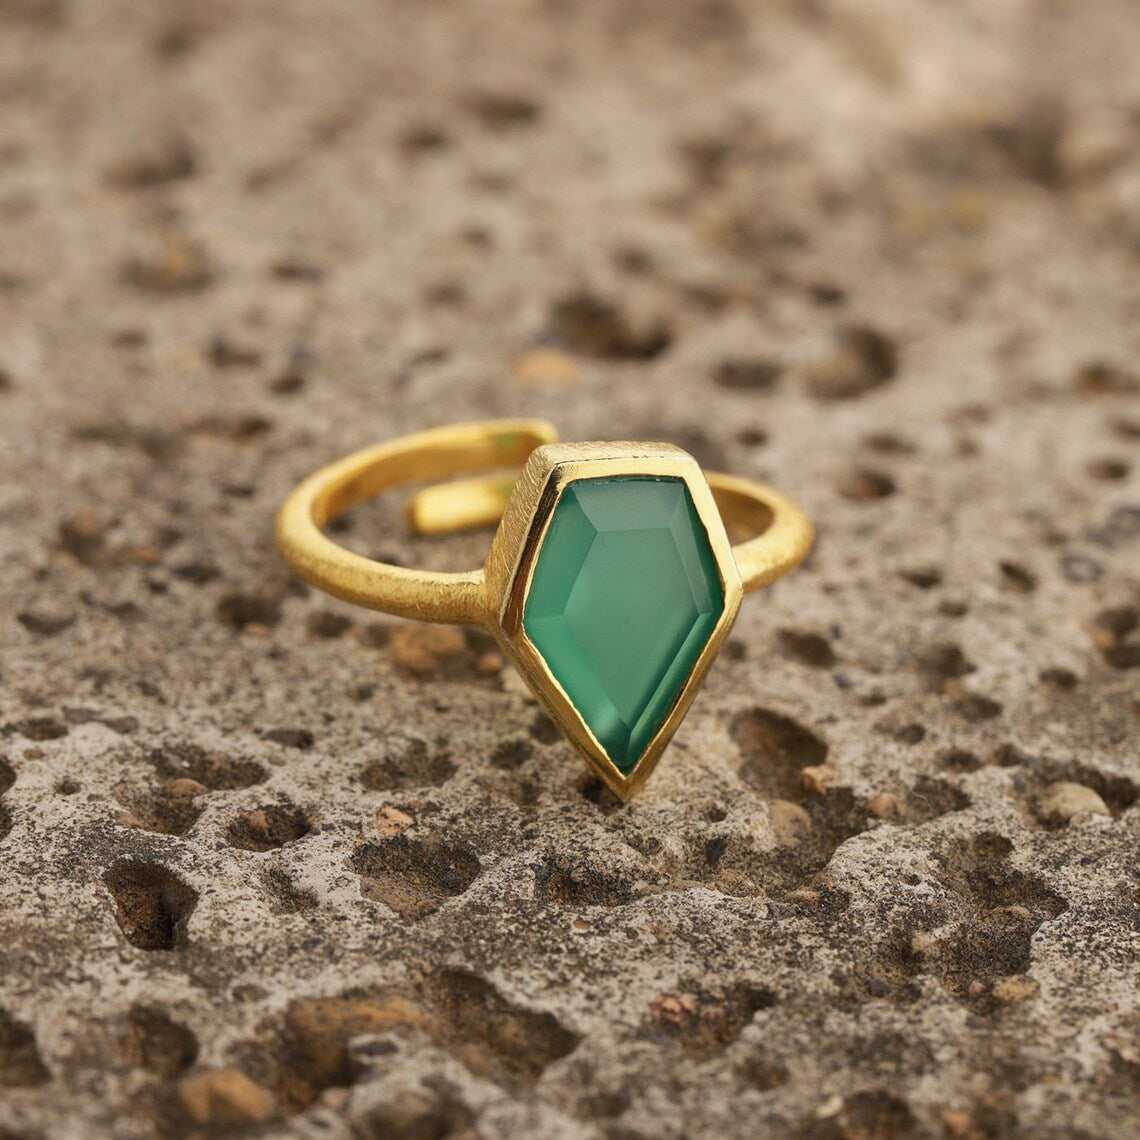 Green Onyx Ring stack ring, Kite Green Onyx stacking ring Green Onyx Gold Ring 18k Gold Vermeil Sterling Silver Green Onyx Adjustable Ring